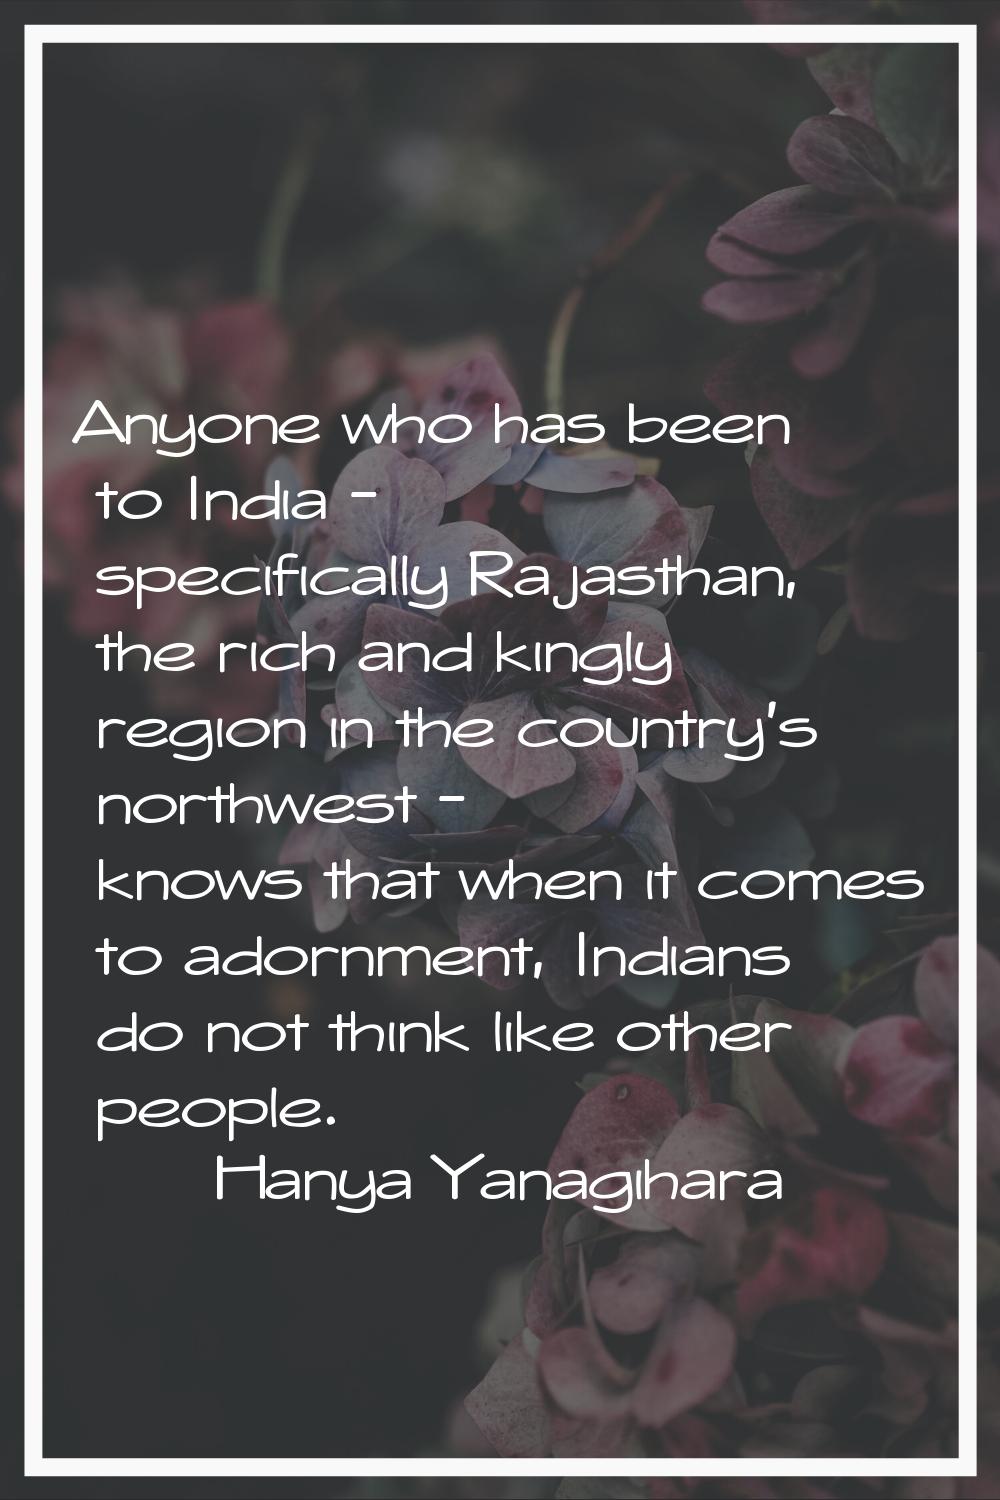 Anyone who has been to India - specifically Rajasthan, the rich and kingly region in the country's 